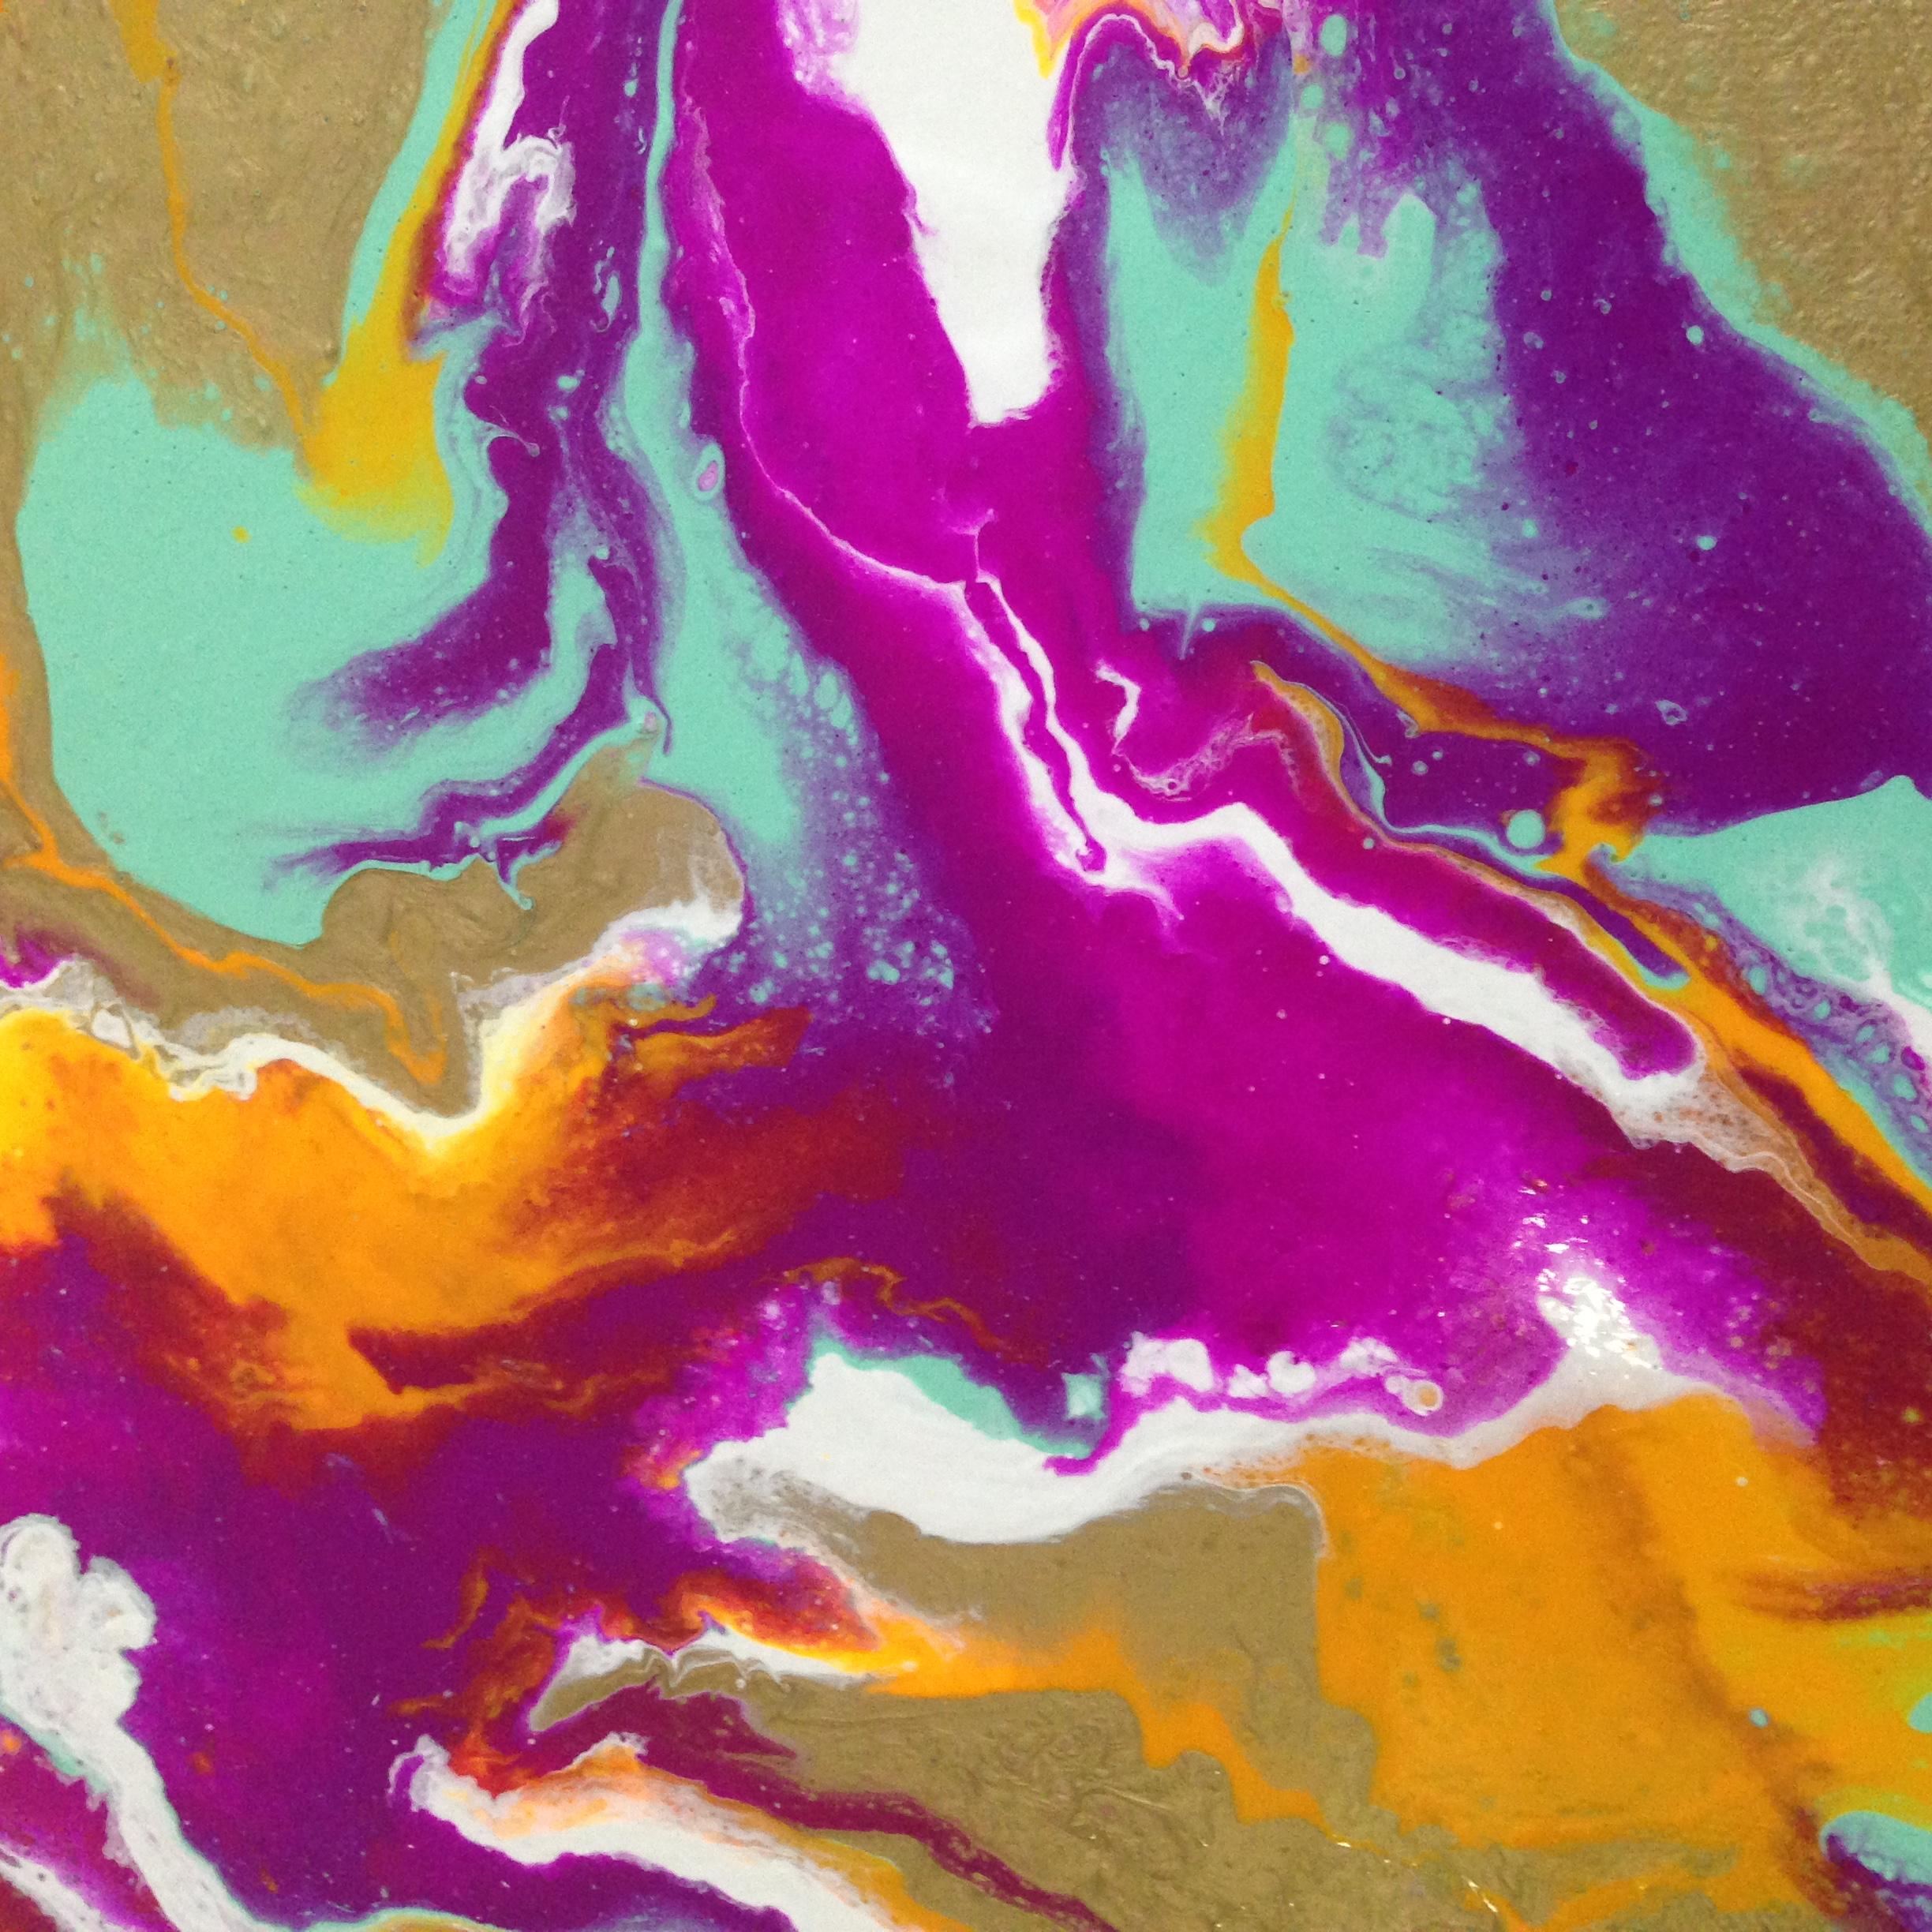 Crafts and Cannabis - Abstract Fluid Painting - Los Angeles 21+